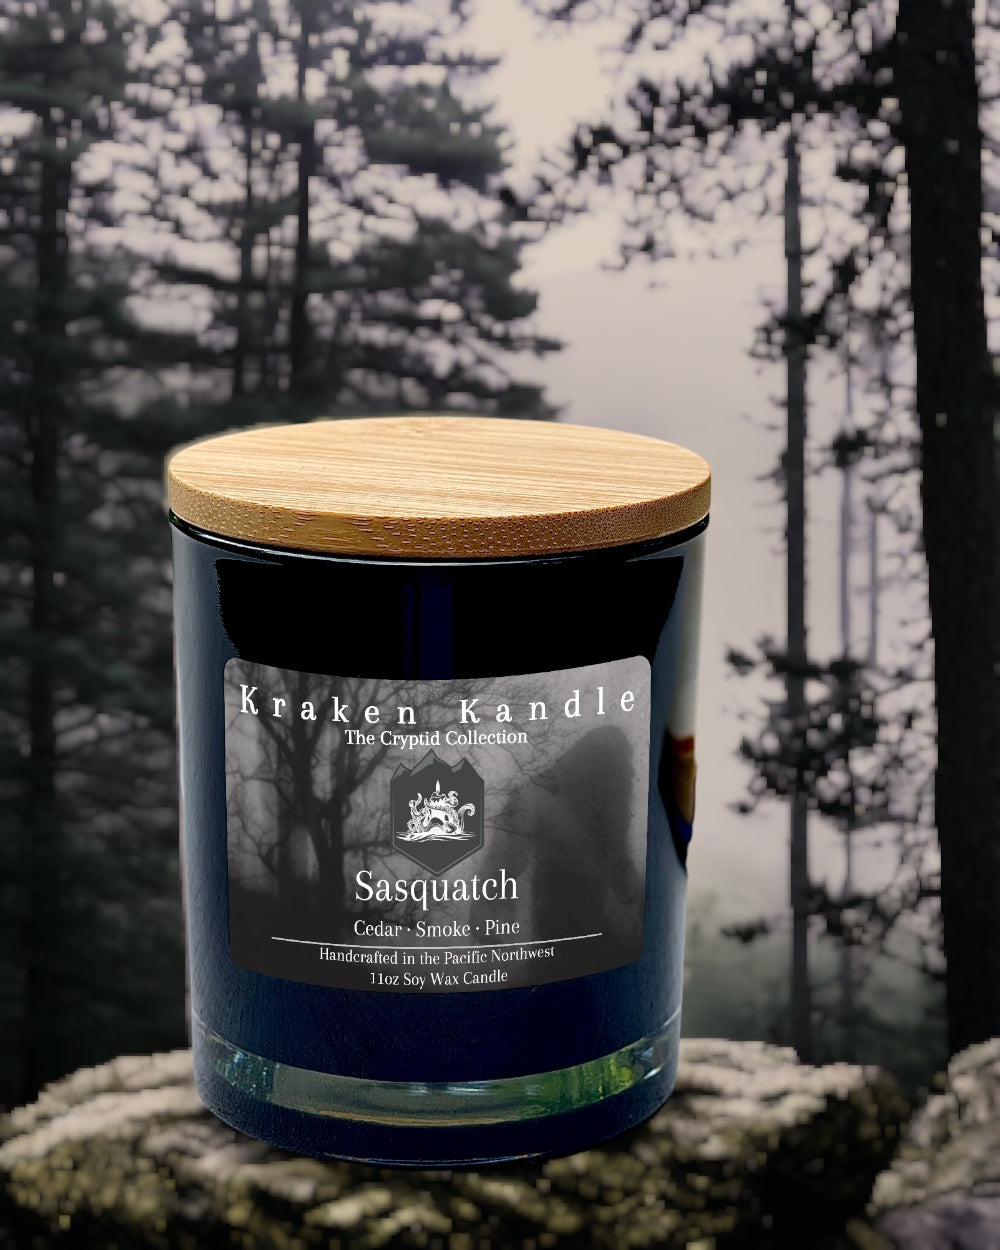 Sasquatch Bigfoot Candle in the foggy Pacific Northwest Forest